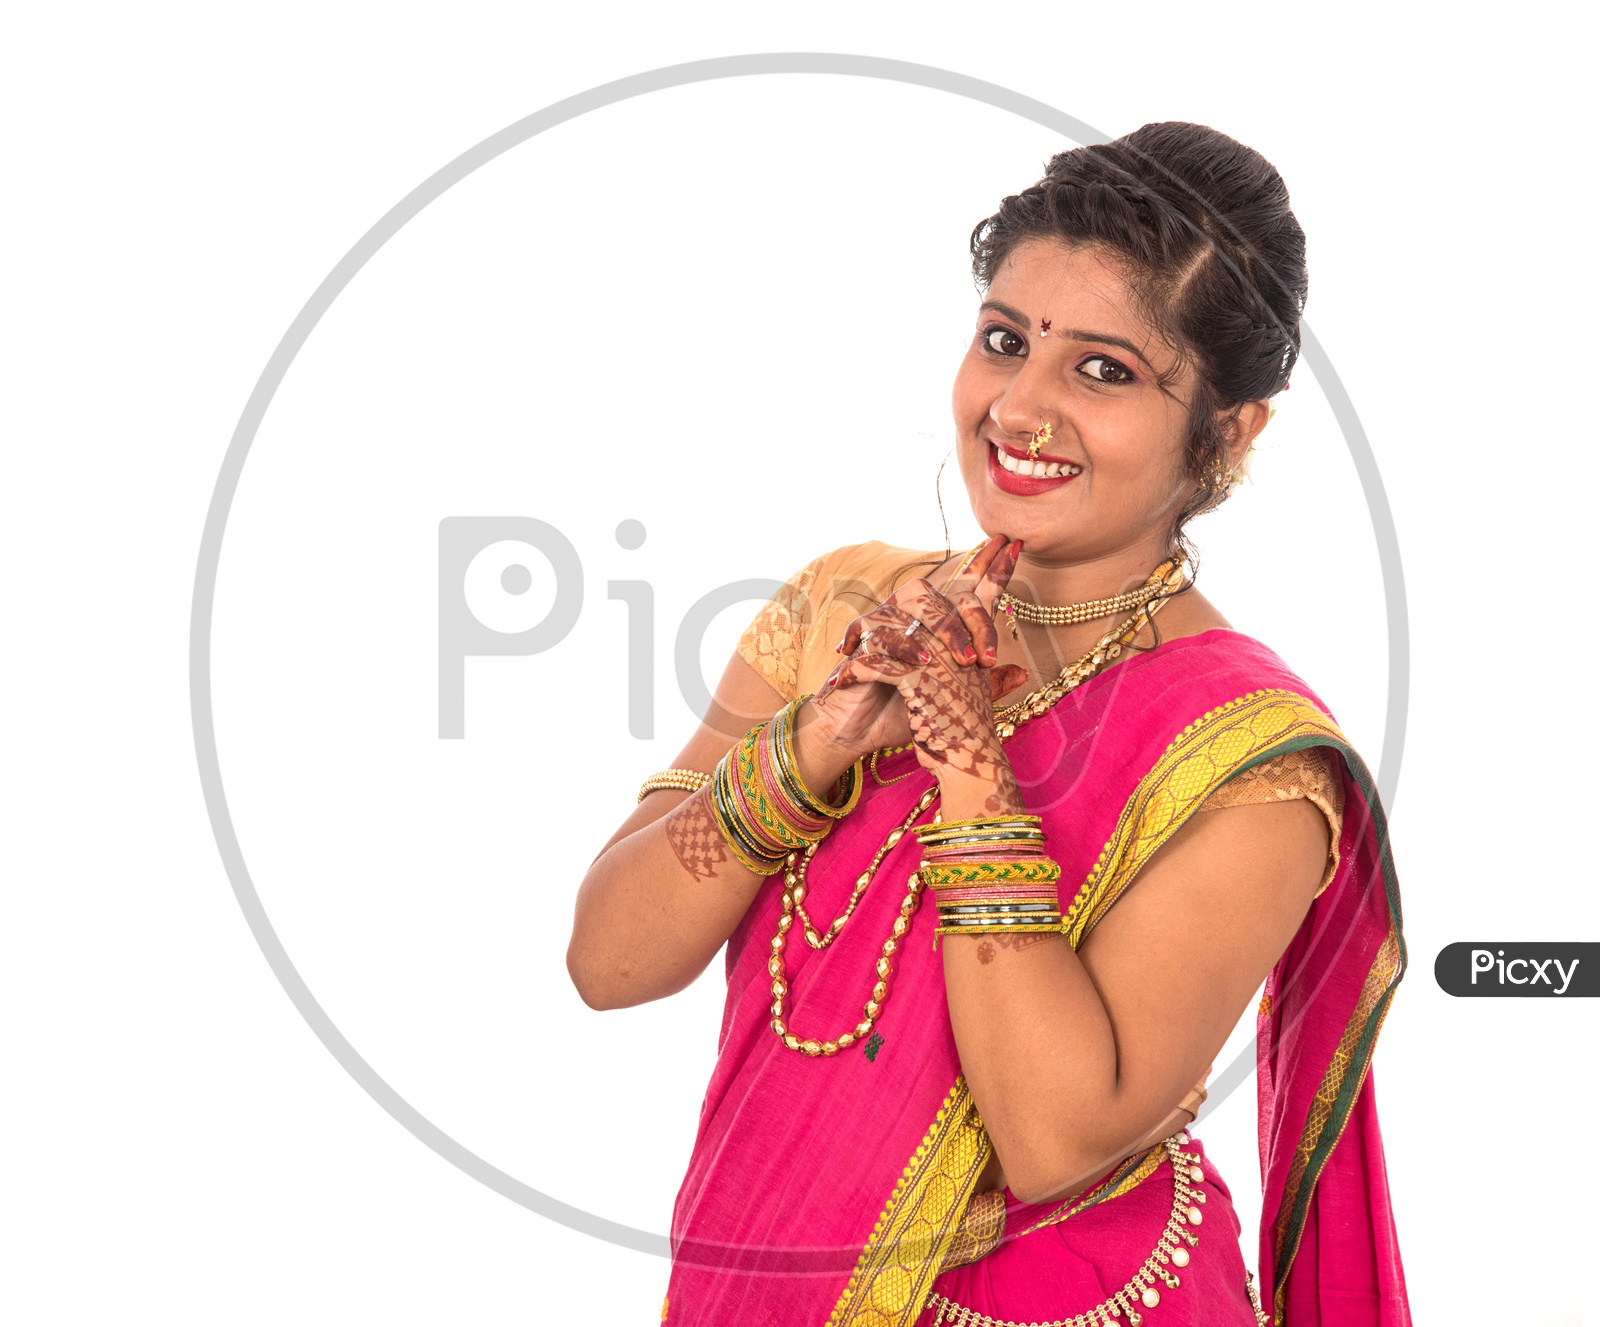 Image of Portrait Of a Young Traditional Marathi Woman Wearing an Elegant  Sari And Posing On an Isolated White Background-UT896404-Picxy